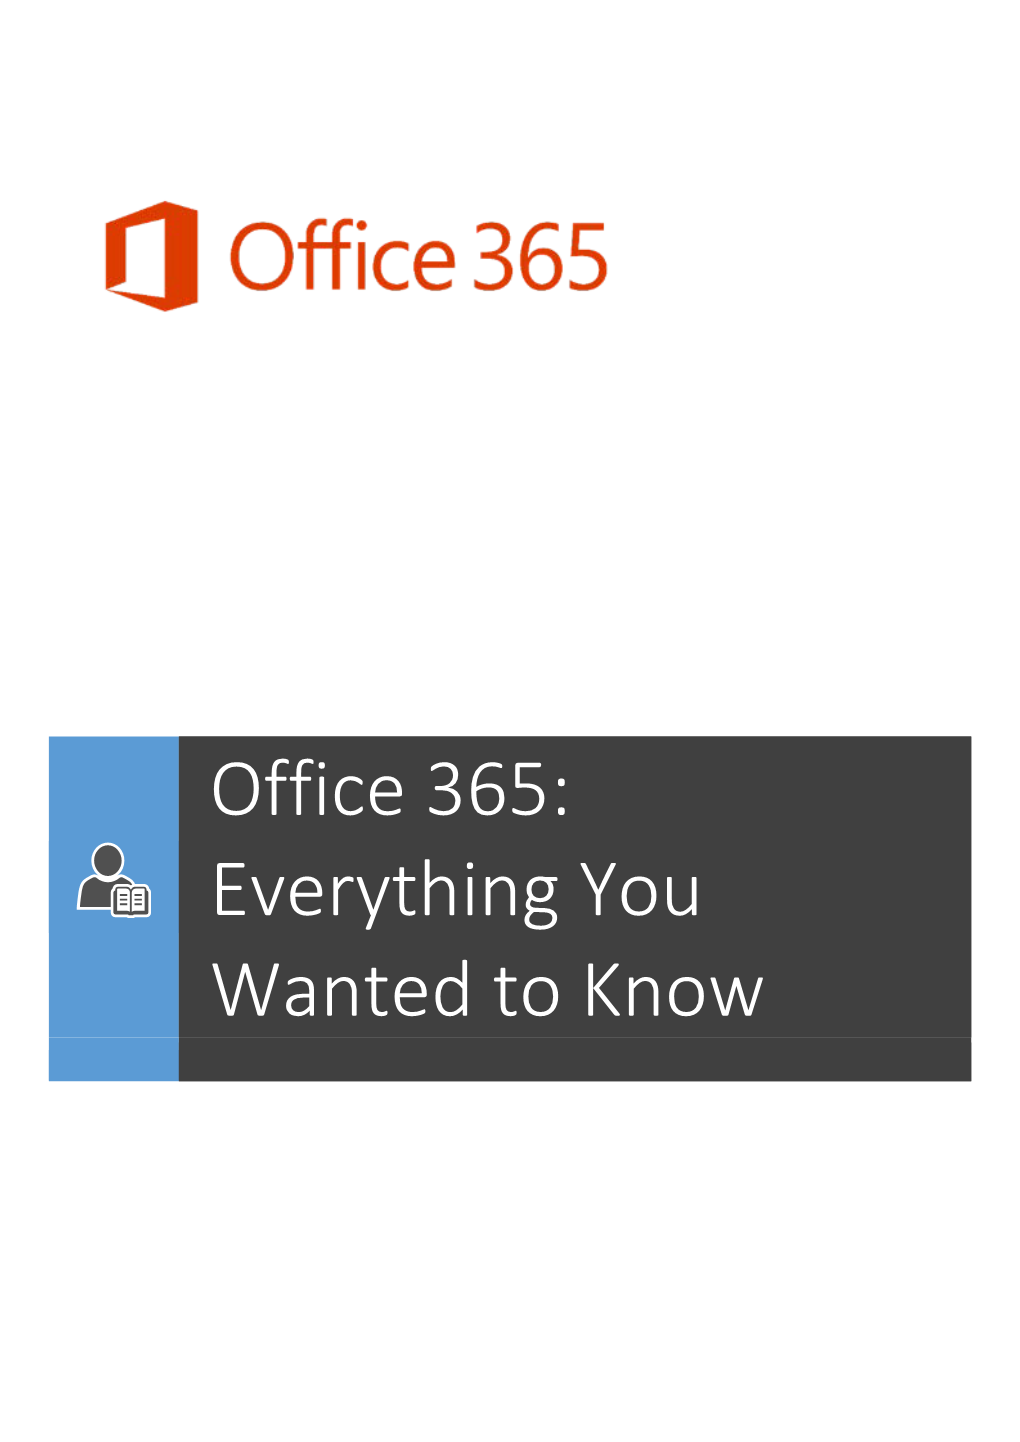 Office 365: Everything You Wanted to Know